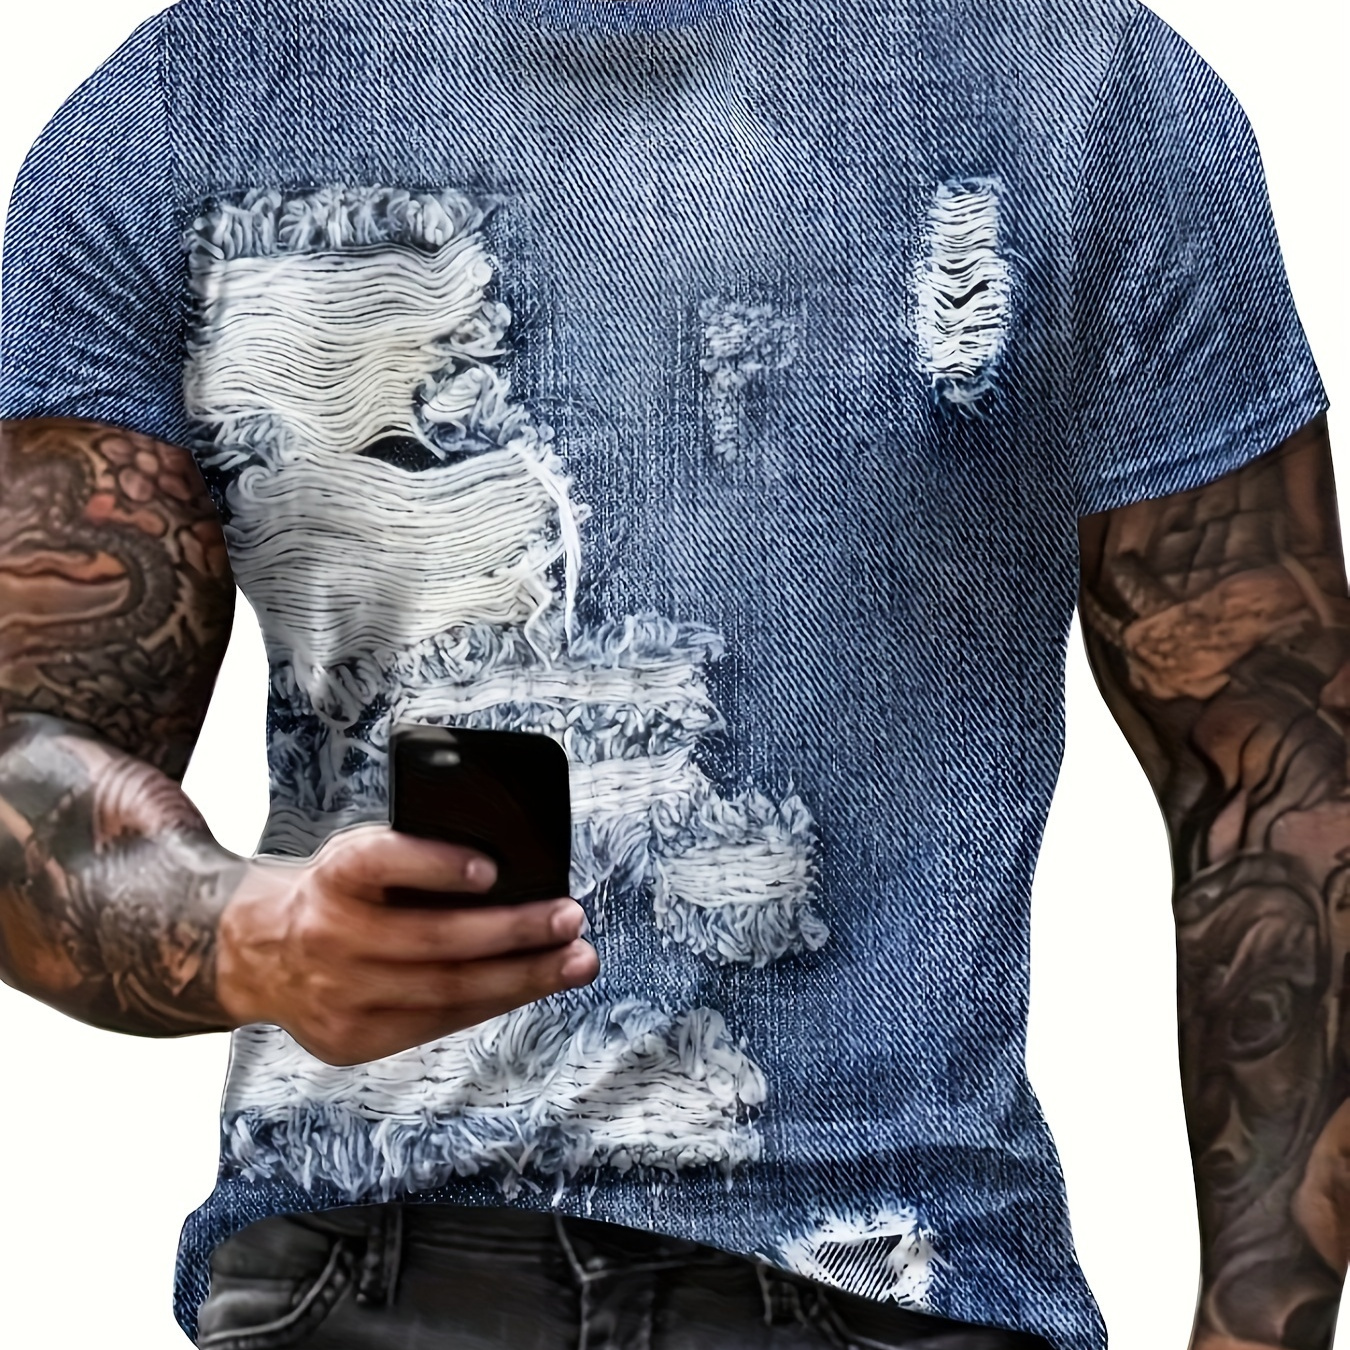 

3d Digital Ripped Denim Pieces Like Pattern Print Crew Neck And Short Sleeve T-shirt For Summer Outdoors Wear, Chic And Fashionable Tops For Men